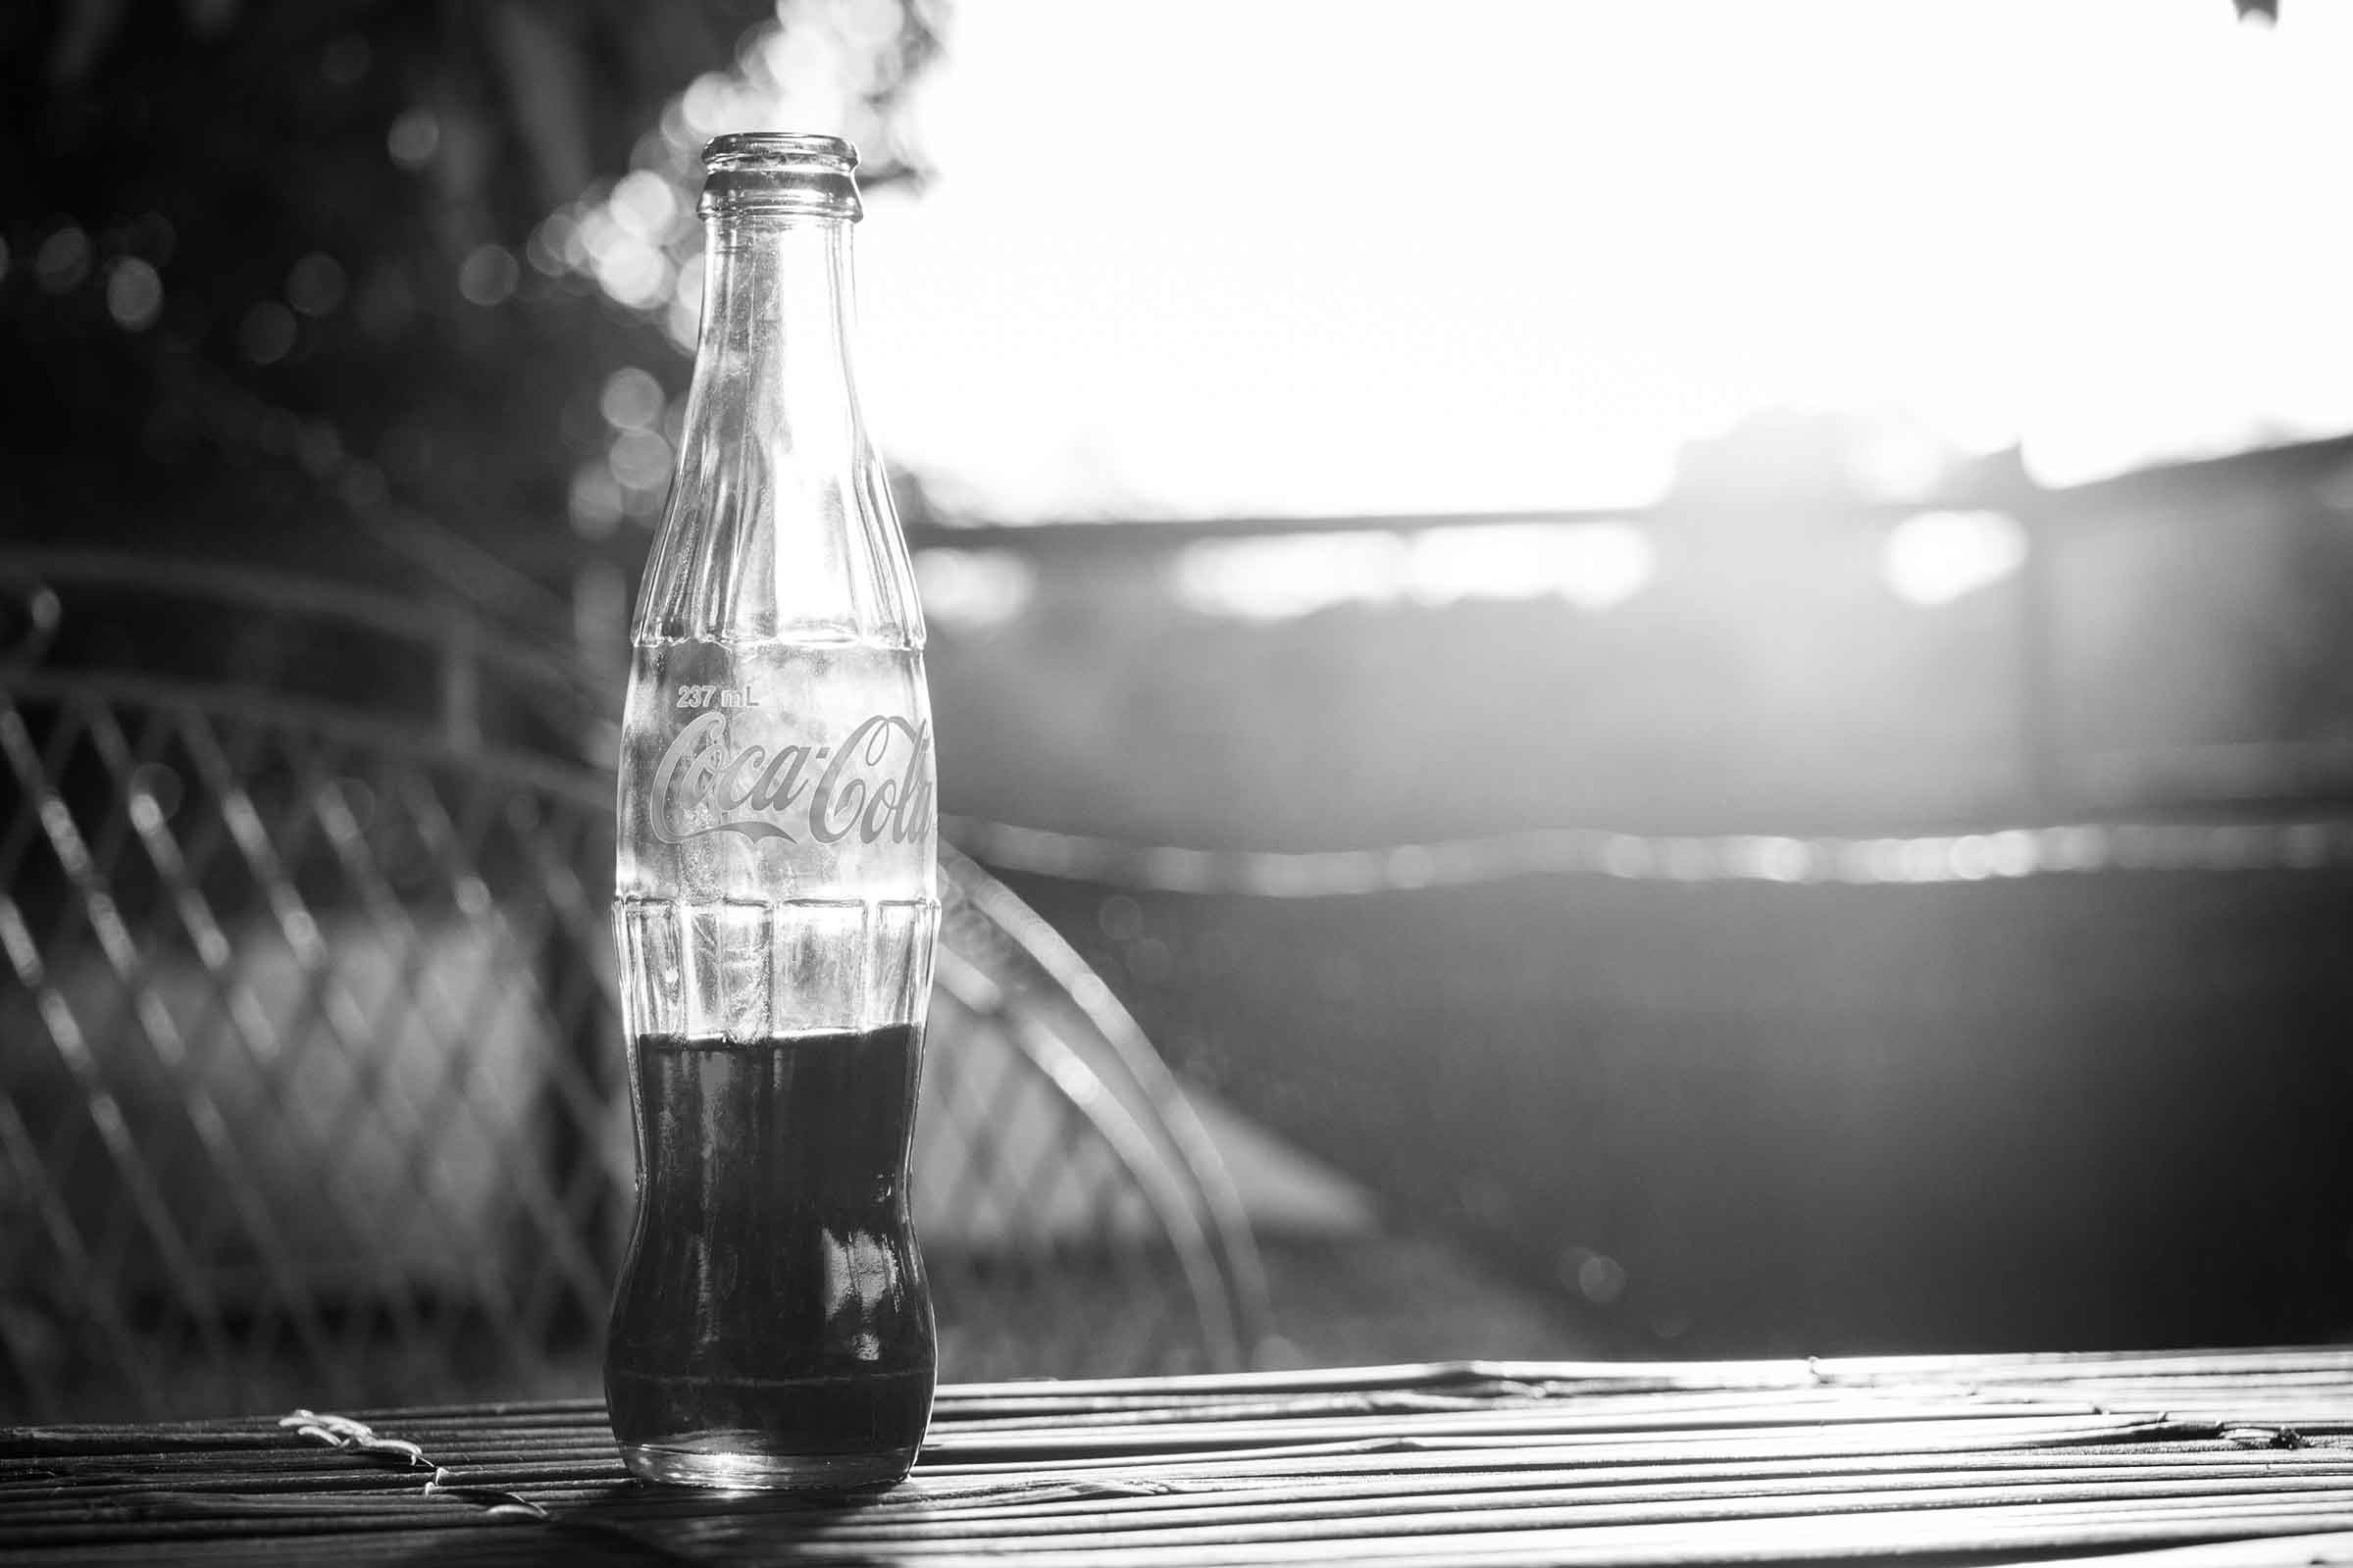 Photo of a Coca-cola bottle on a table